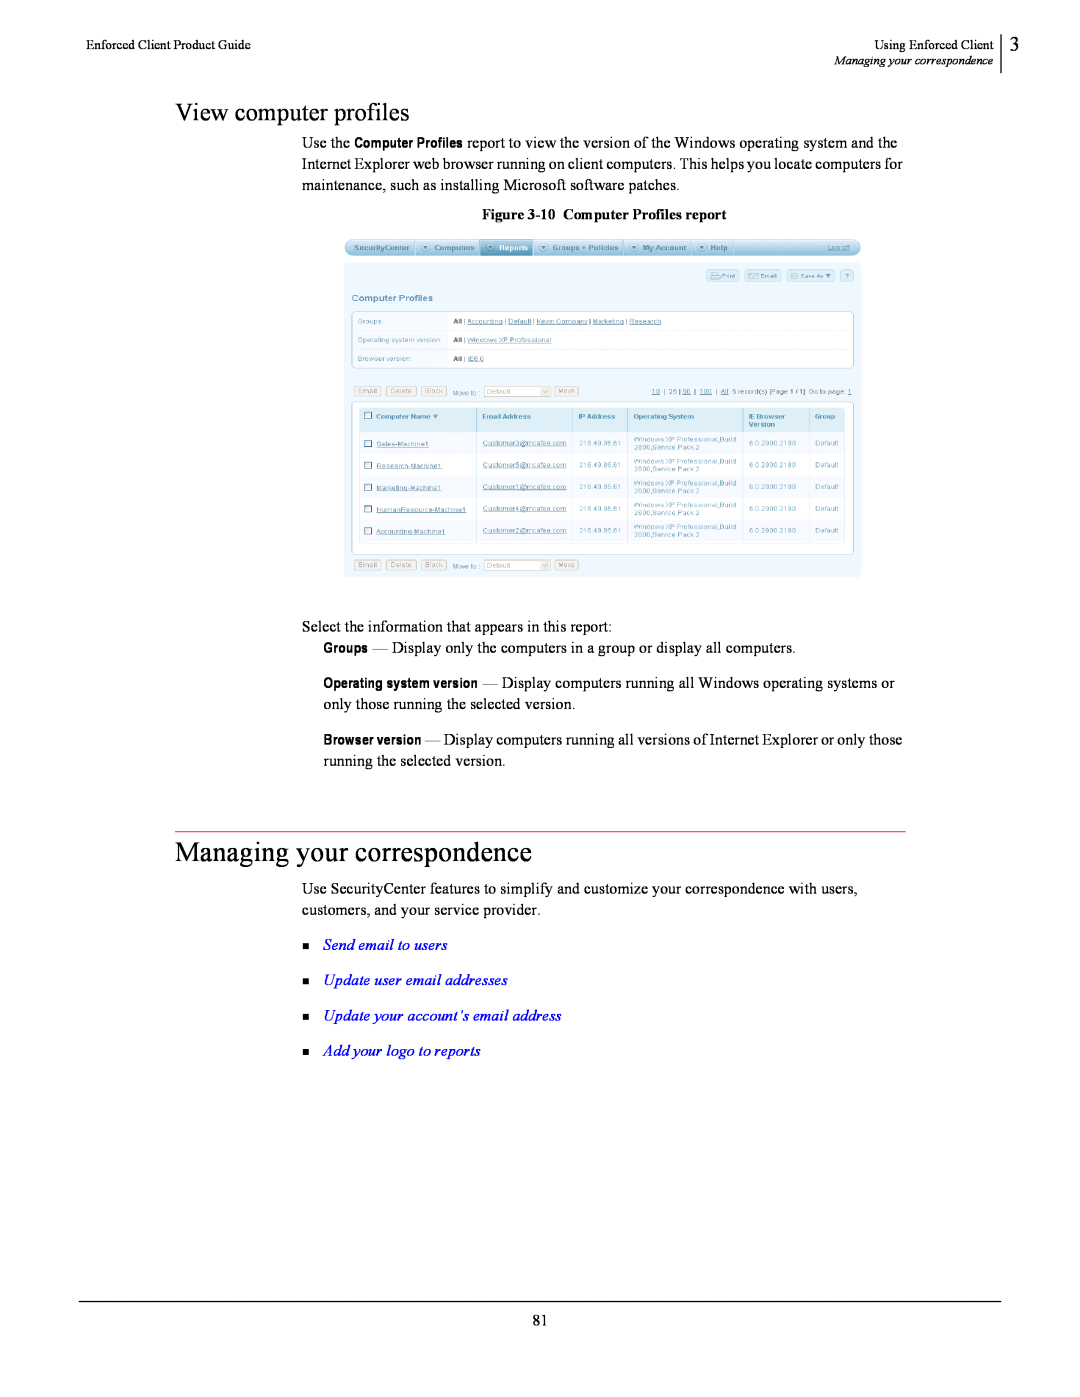 SonicWALL 4.5 Managing your correspondence, View computer profiles, „ Send email to users „ Update user email addresses 